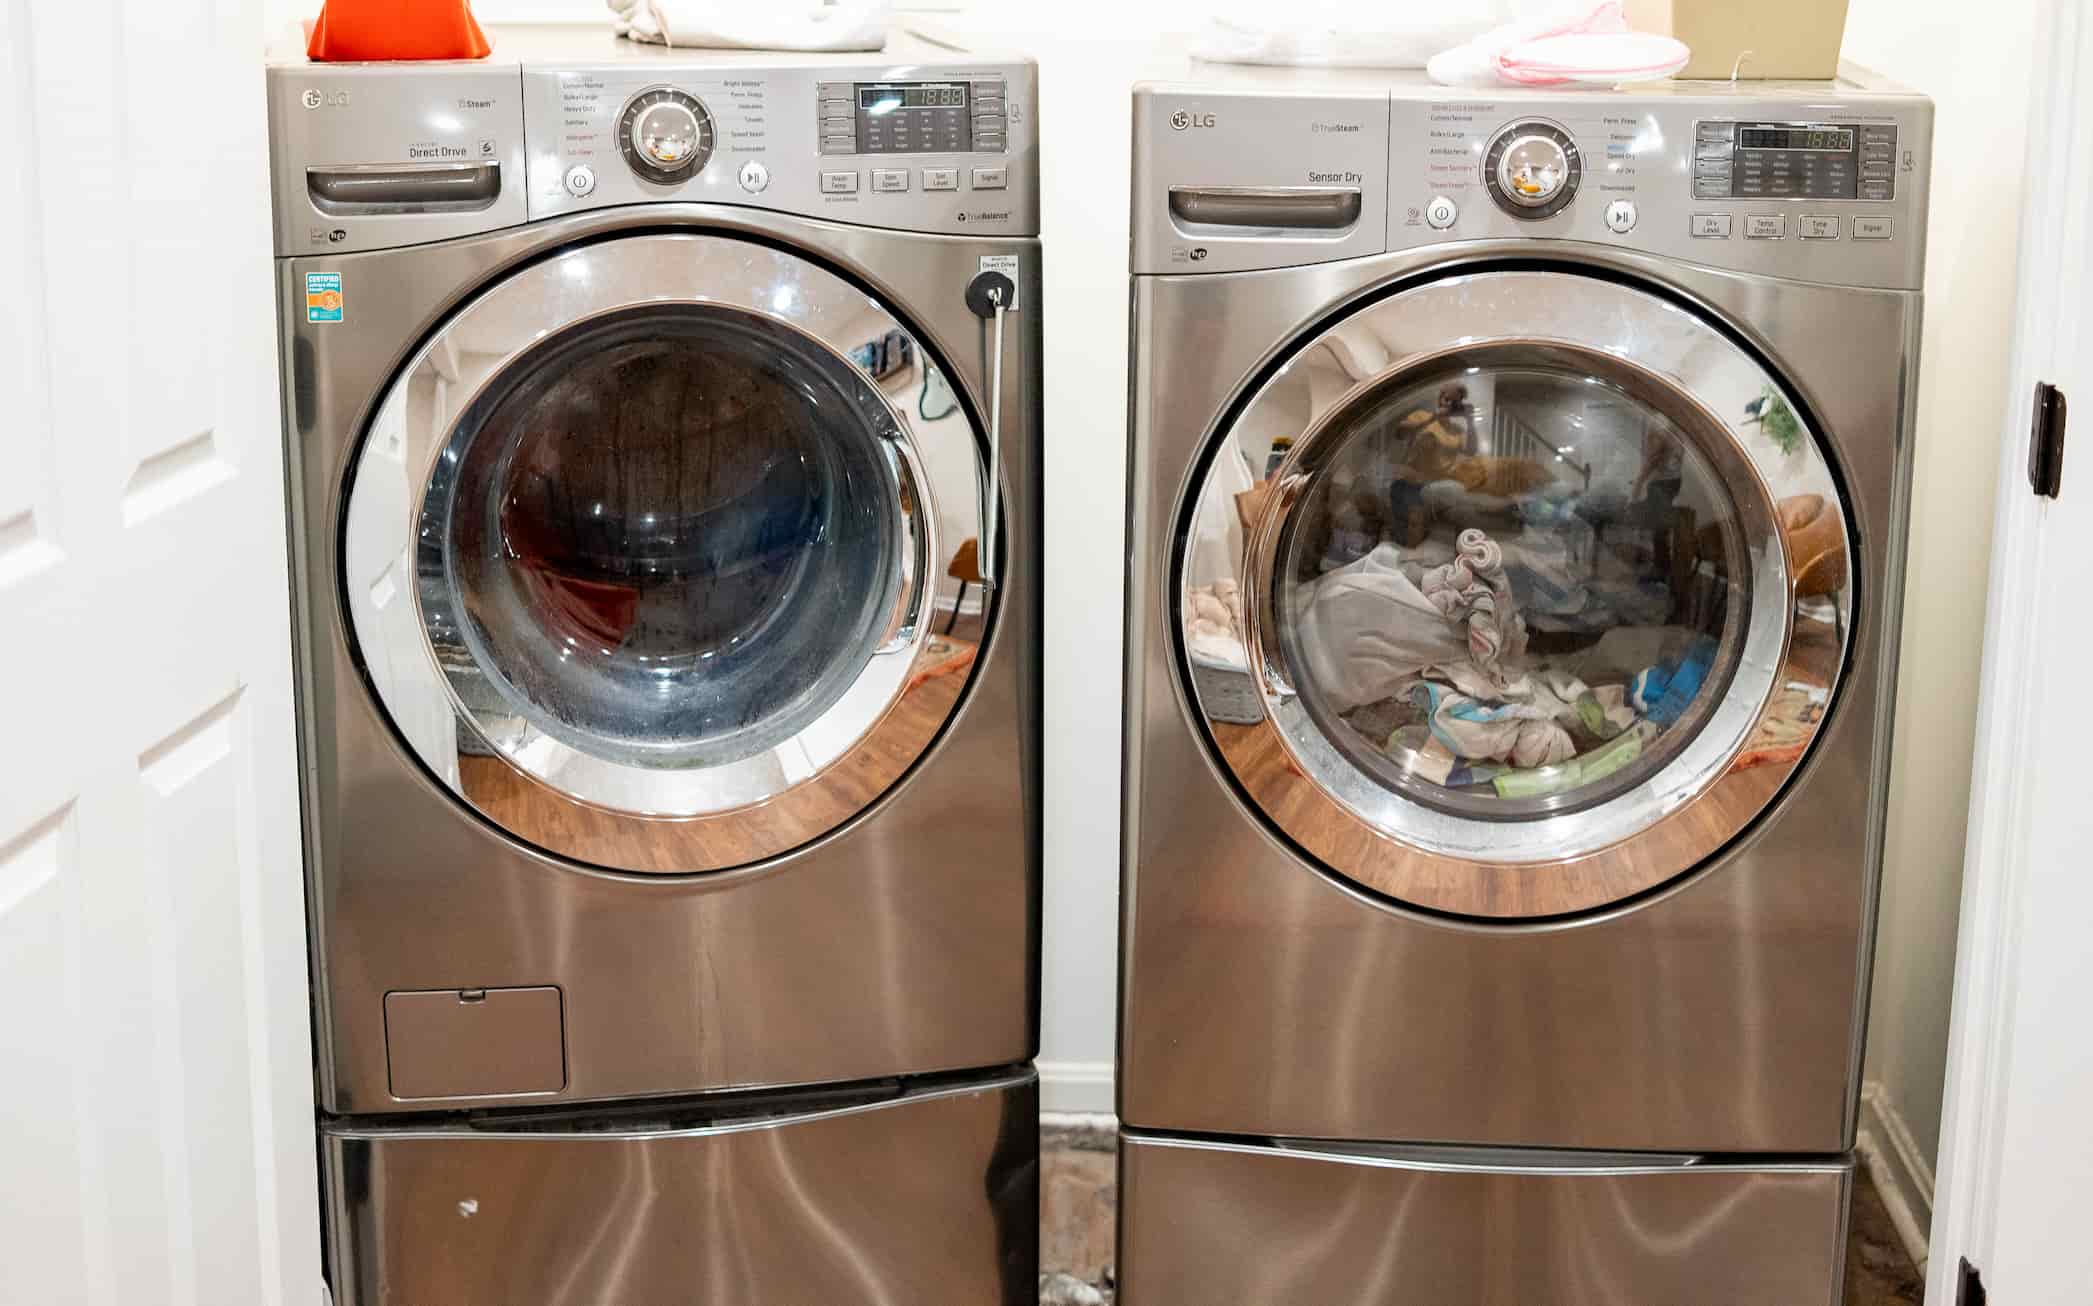 How To Remove The Pedestal From A Washer And Dryer (4 Steps)